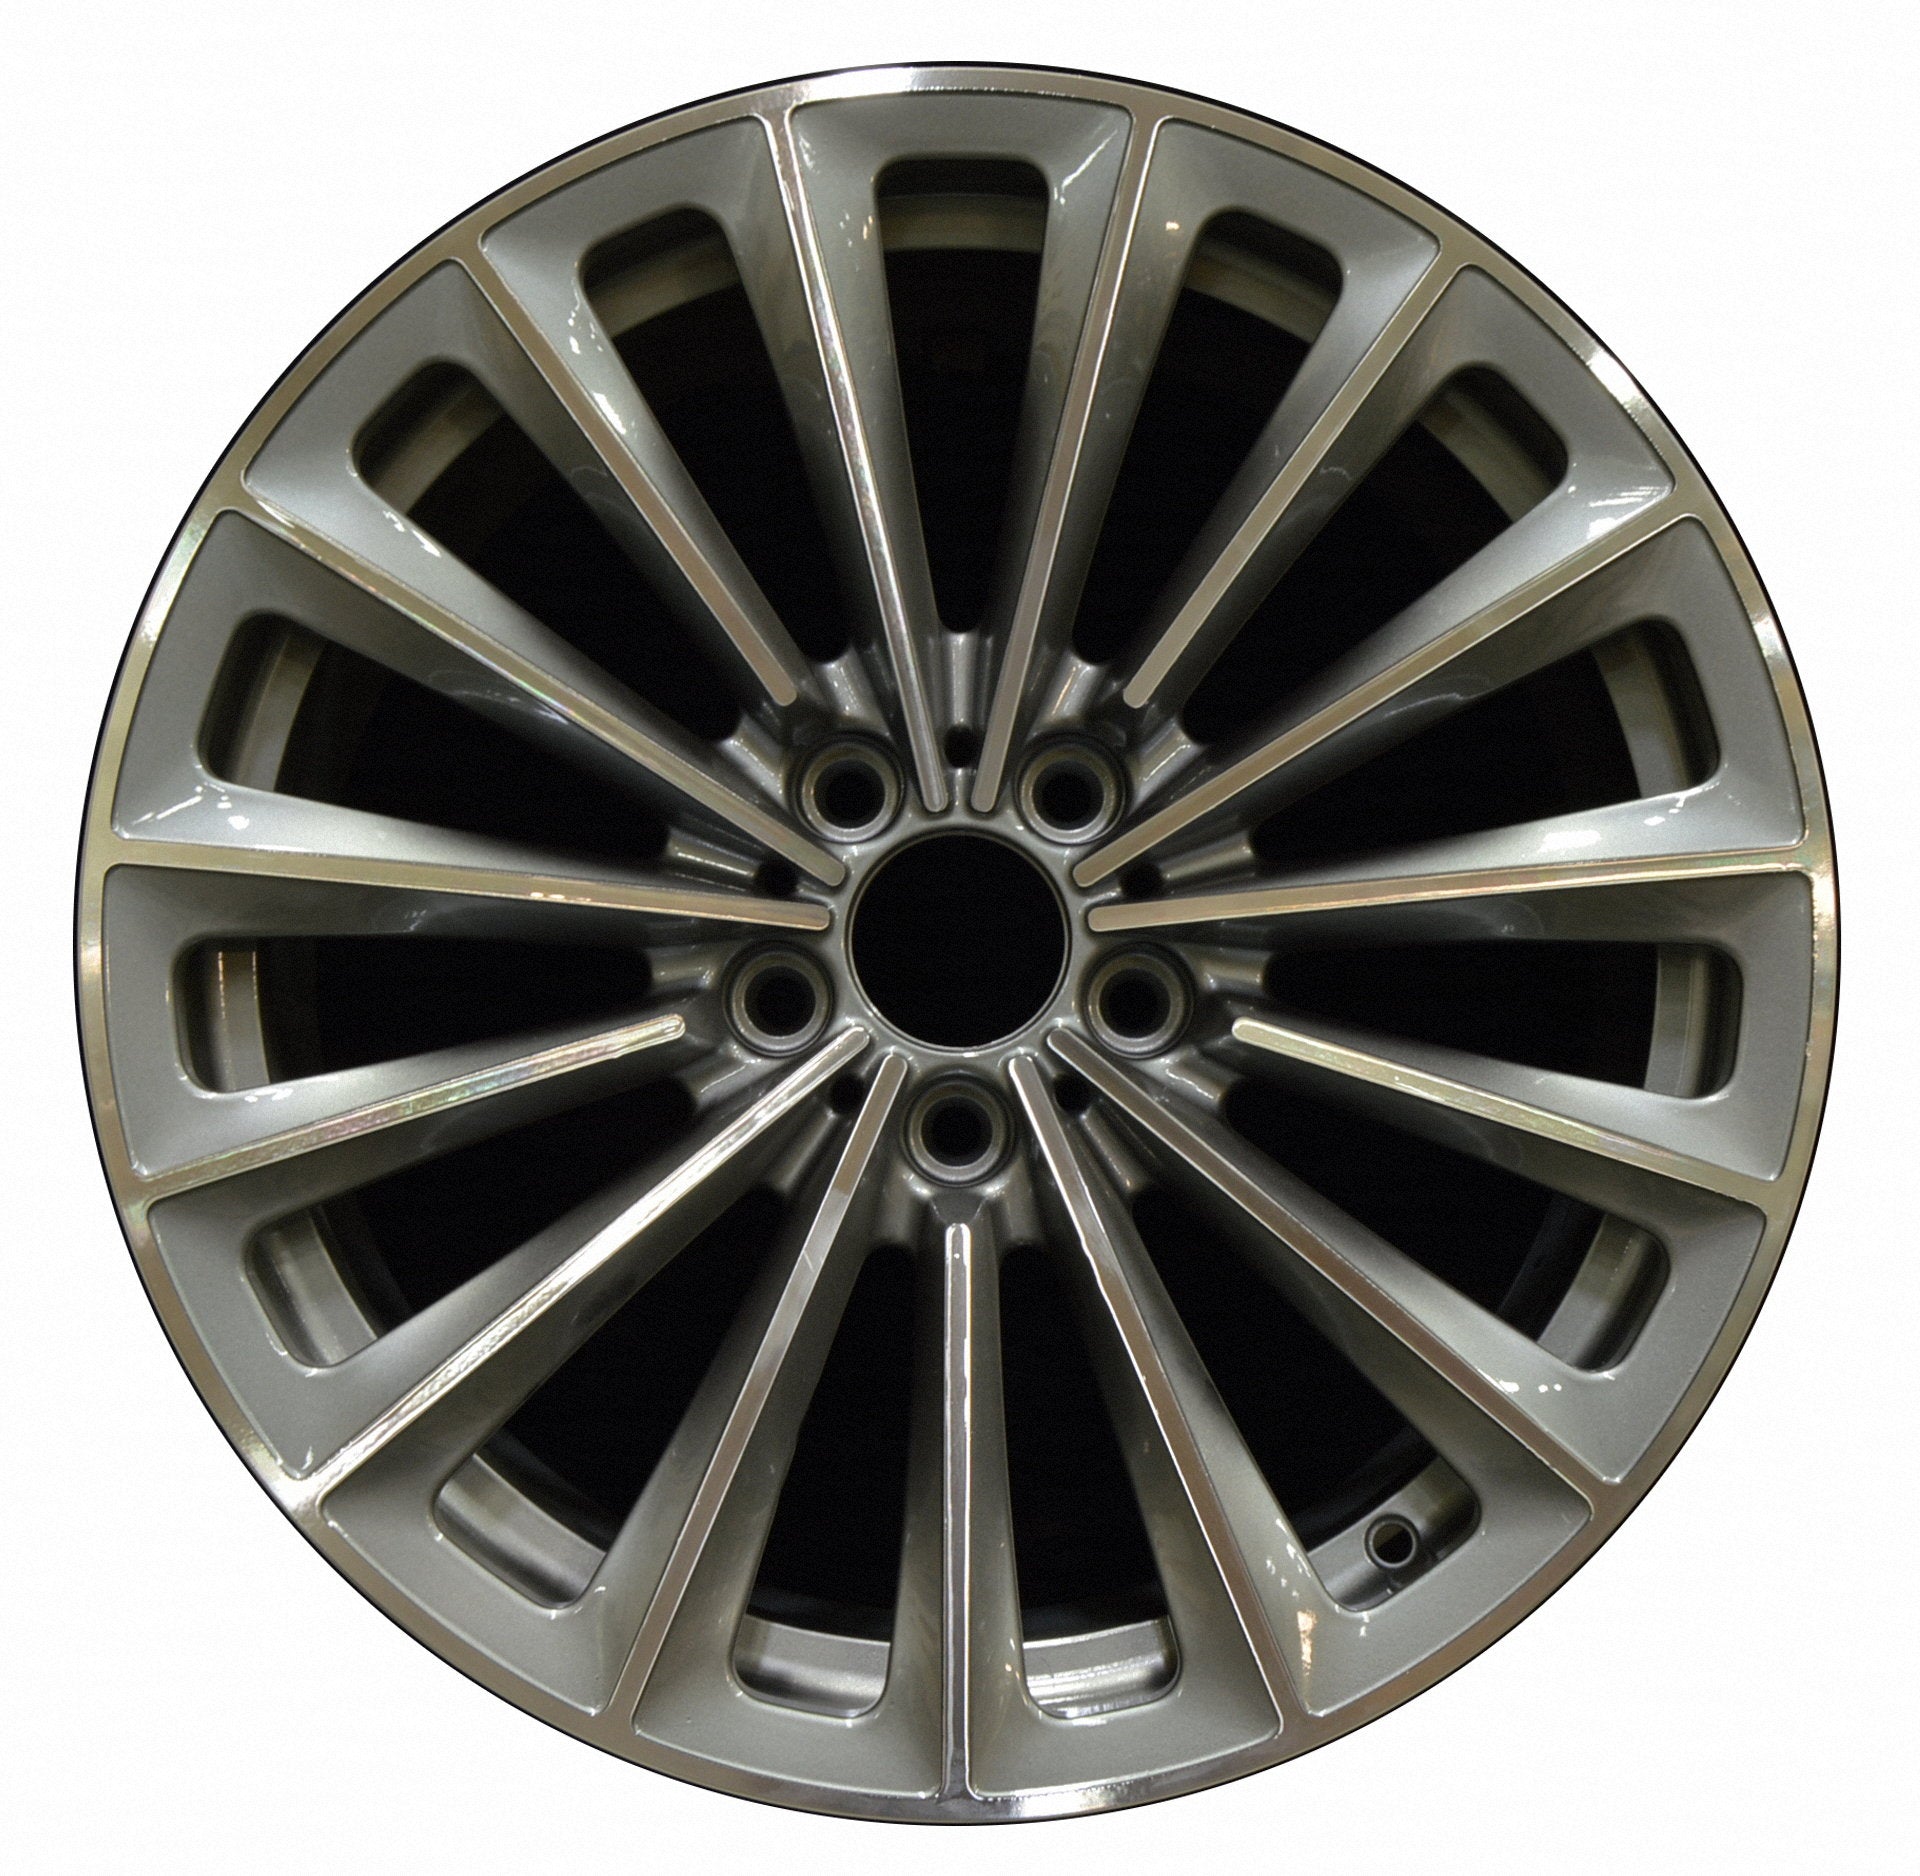 BMW 535i GT  2010, 2011, 2012, 2013, 2014, 2015, 2016, 2017 Factory OEM Car Wheel Size 19x9.5 Alloy WAO.71336RE.LC25.MA